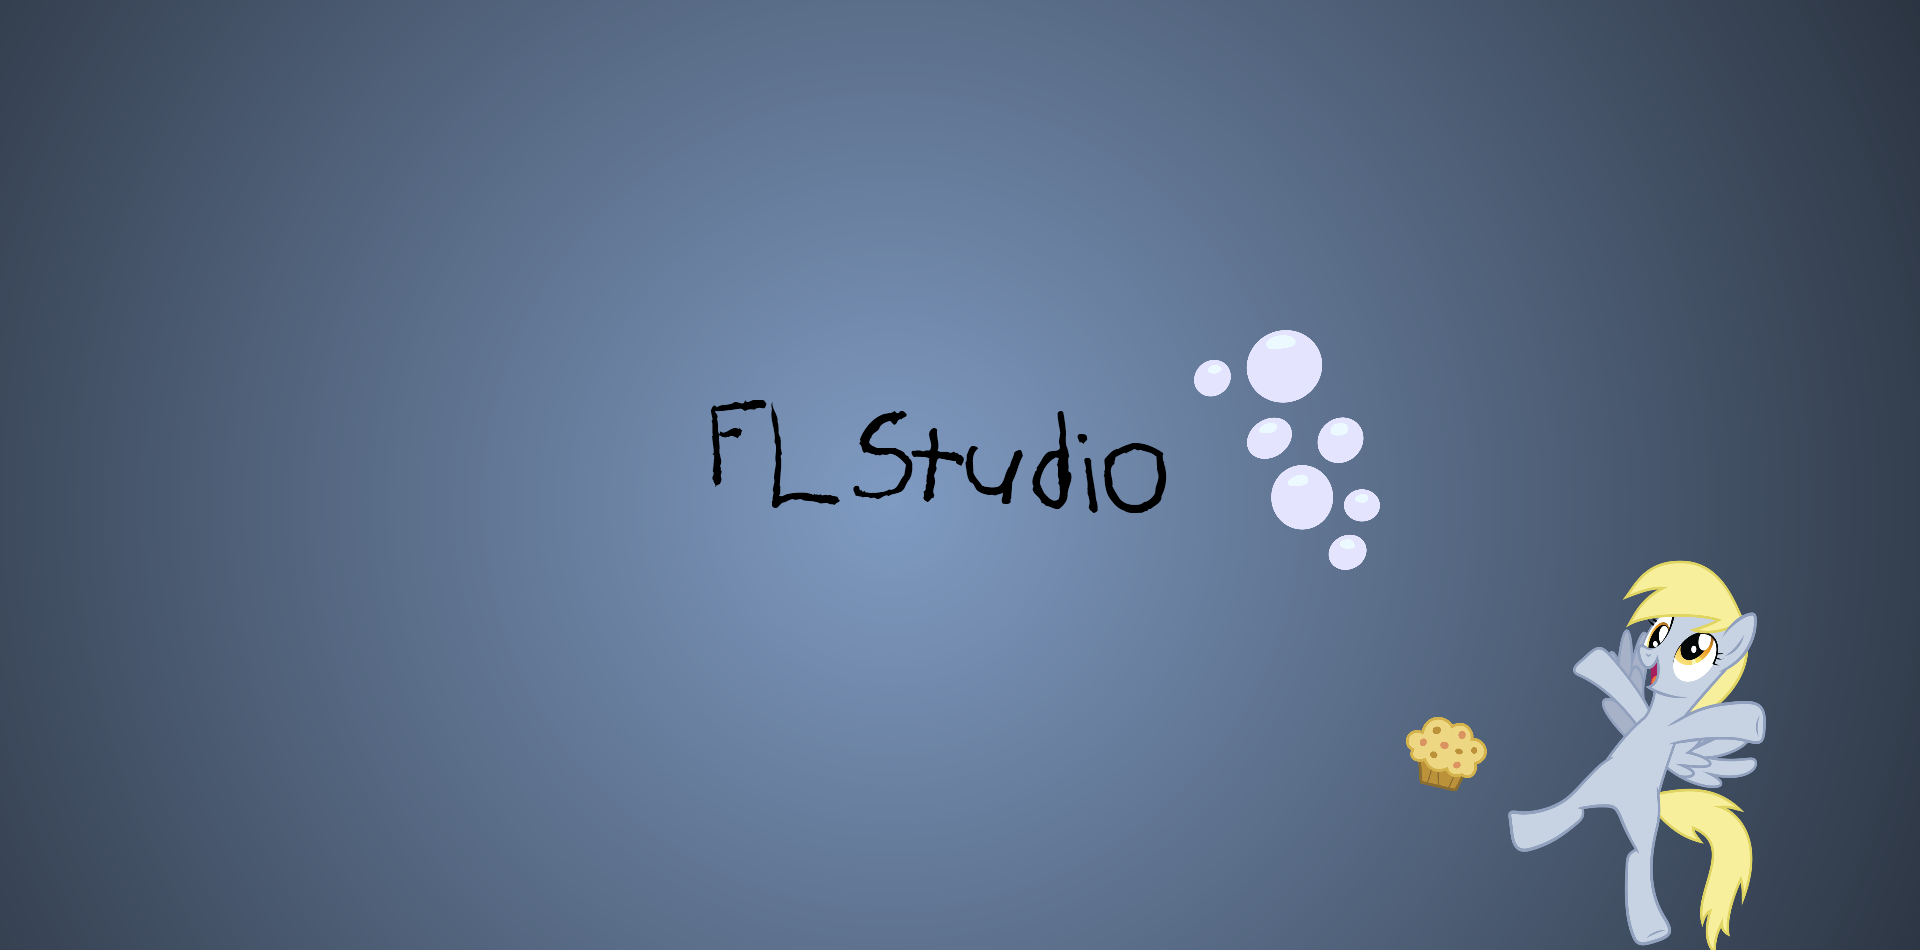 Fl Studio Wallpaper And Background On